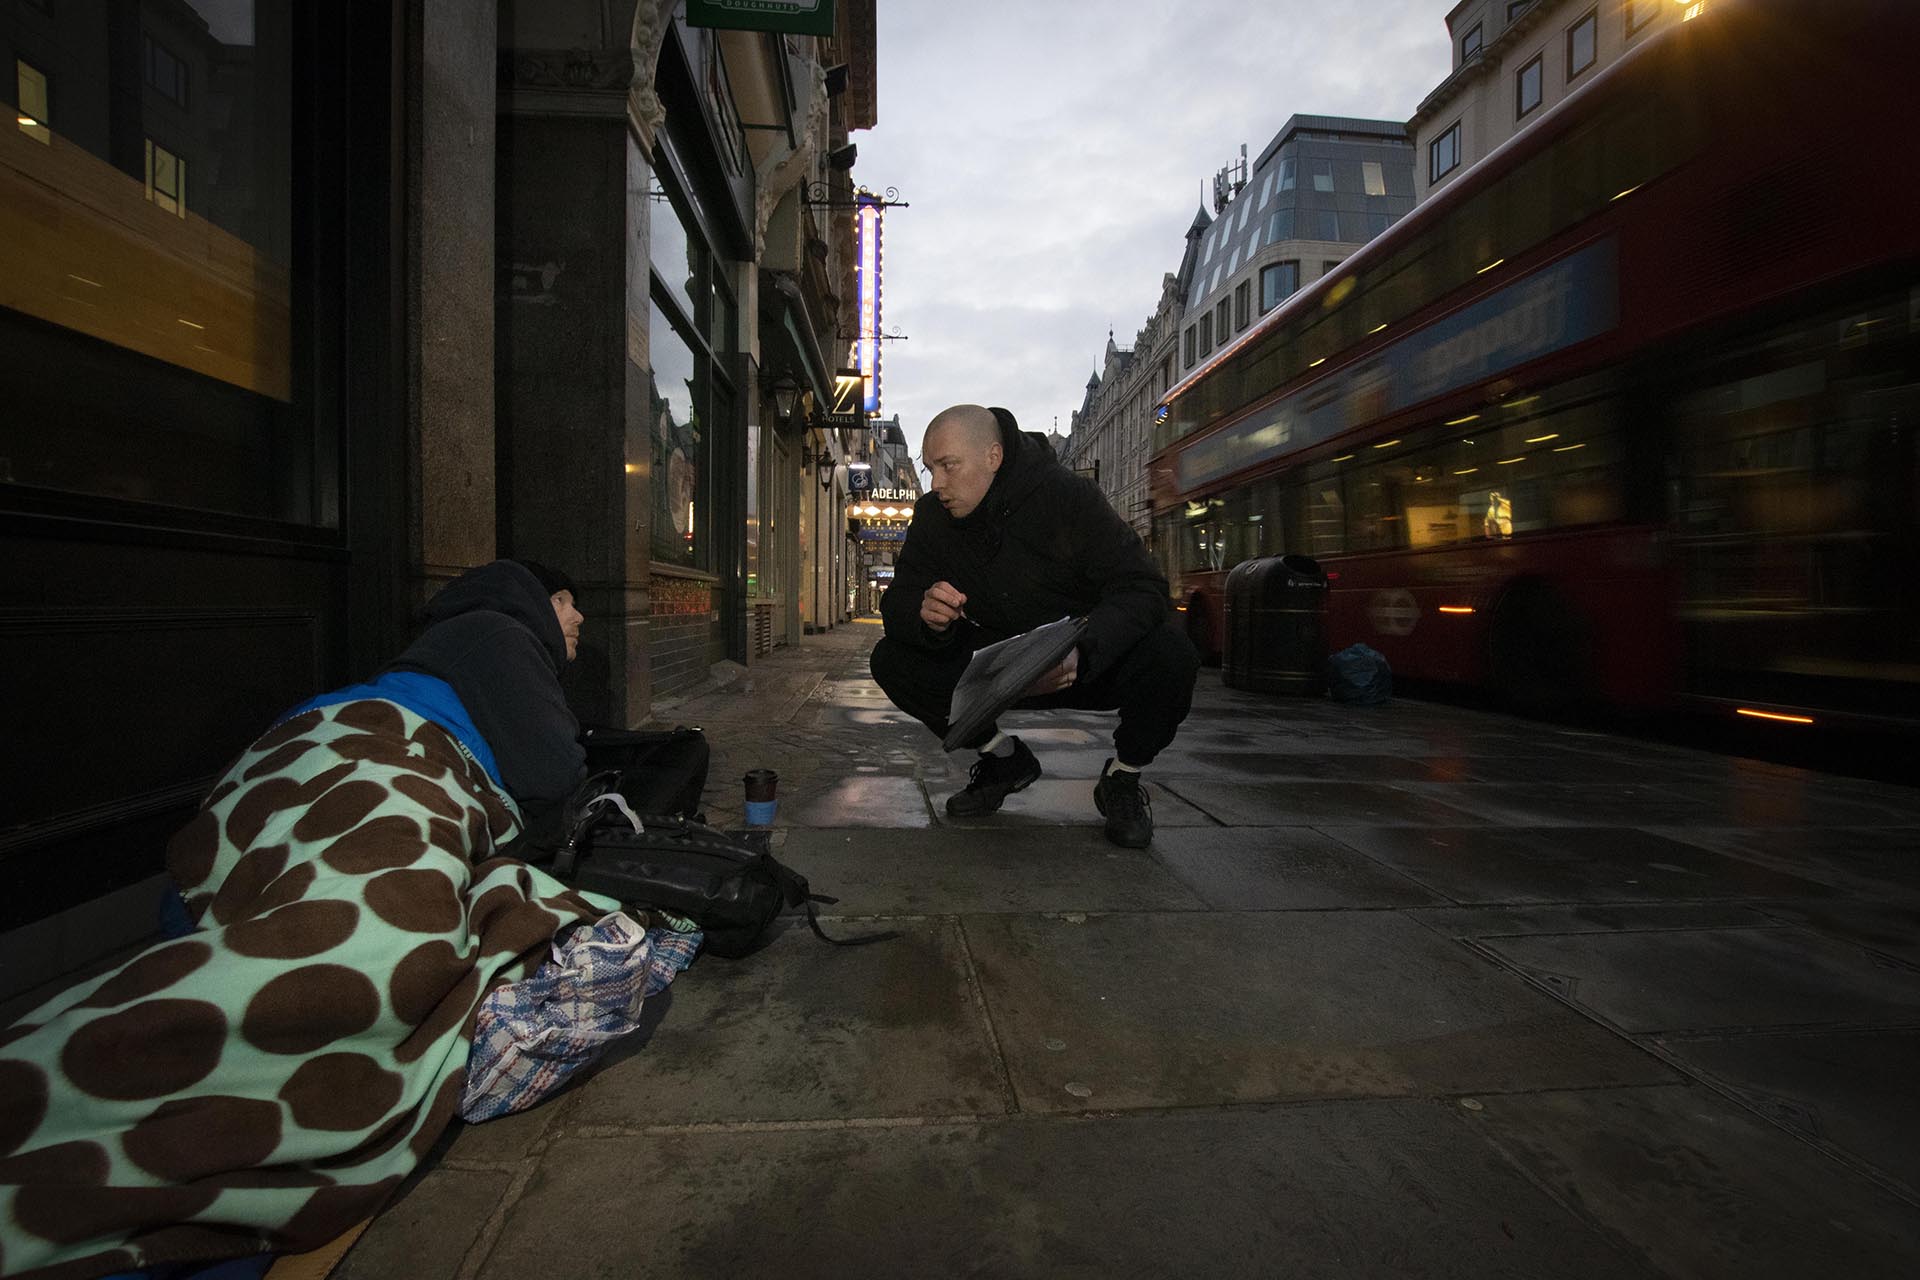 Rough sleeper and outreach worker